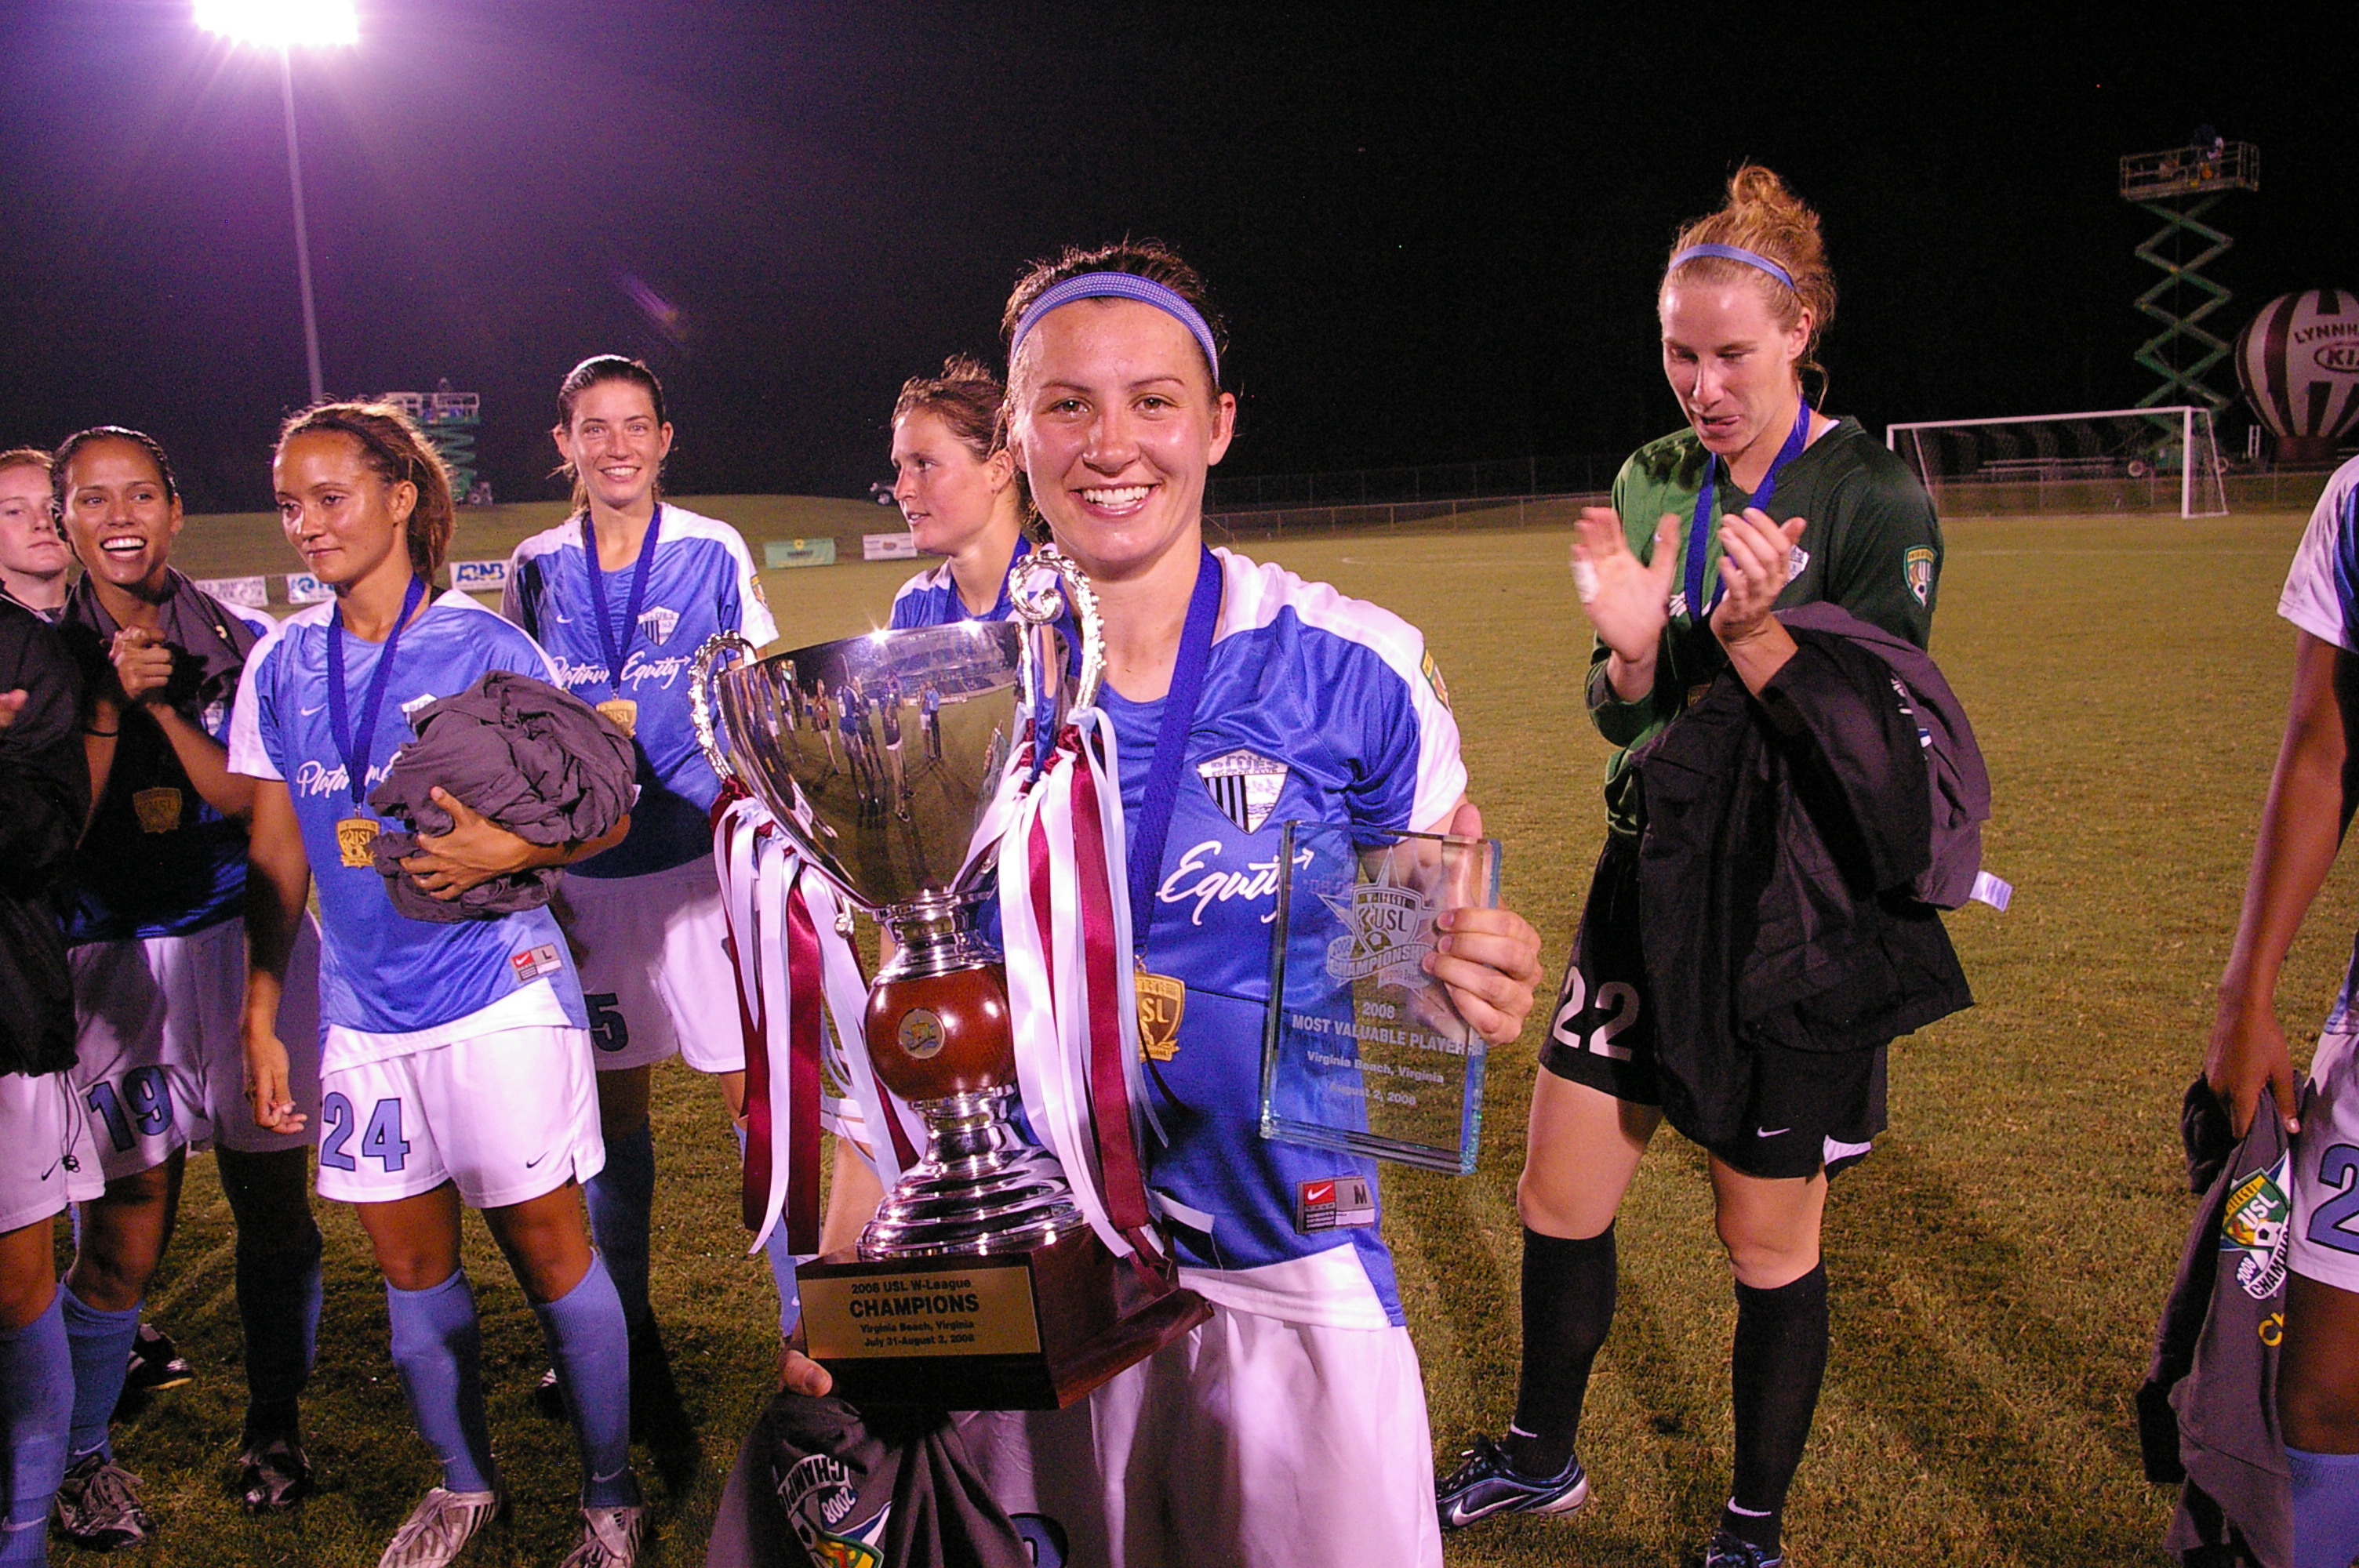 Amy LePeilbet was named MVP after scoring the first goal in the Pali Blues' 2-1 victory in the W-League championship game. Photo: Kenzo Bergeron